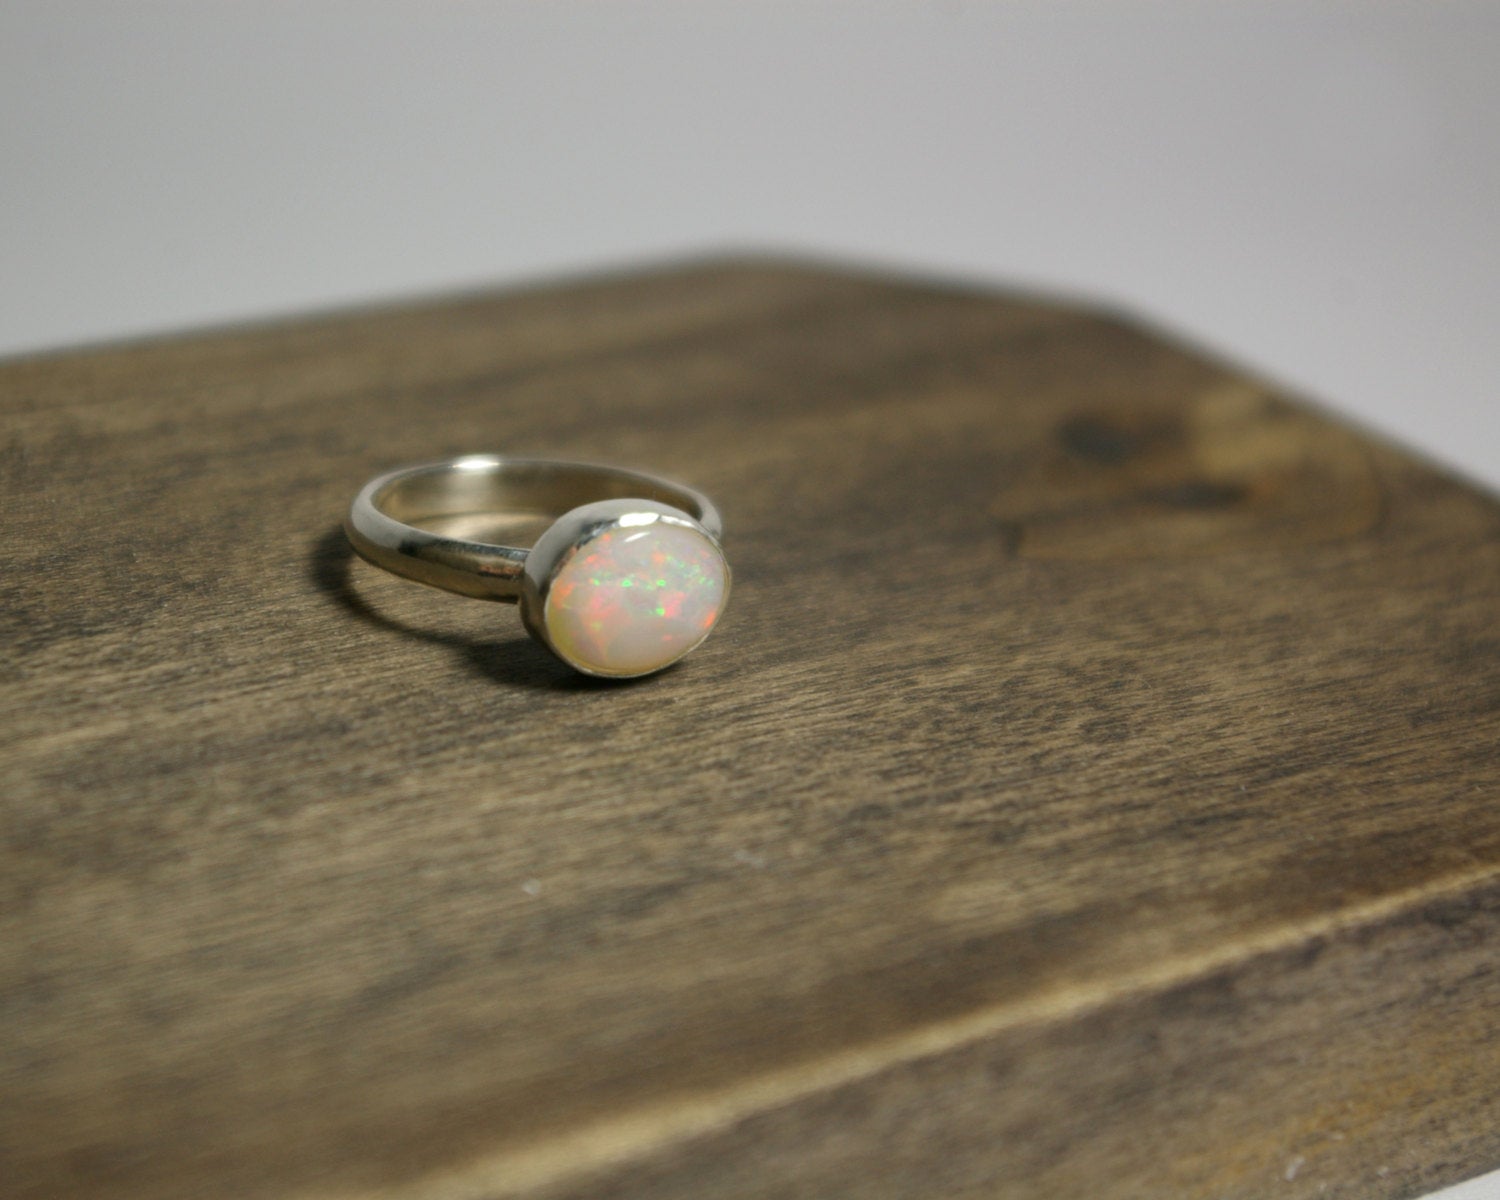 Oval natural white opal set in sterling silver bezel on a sterling silver ring band.